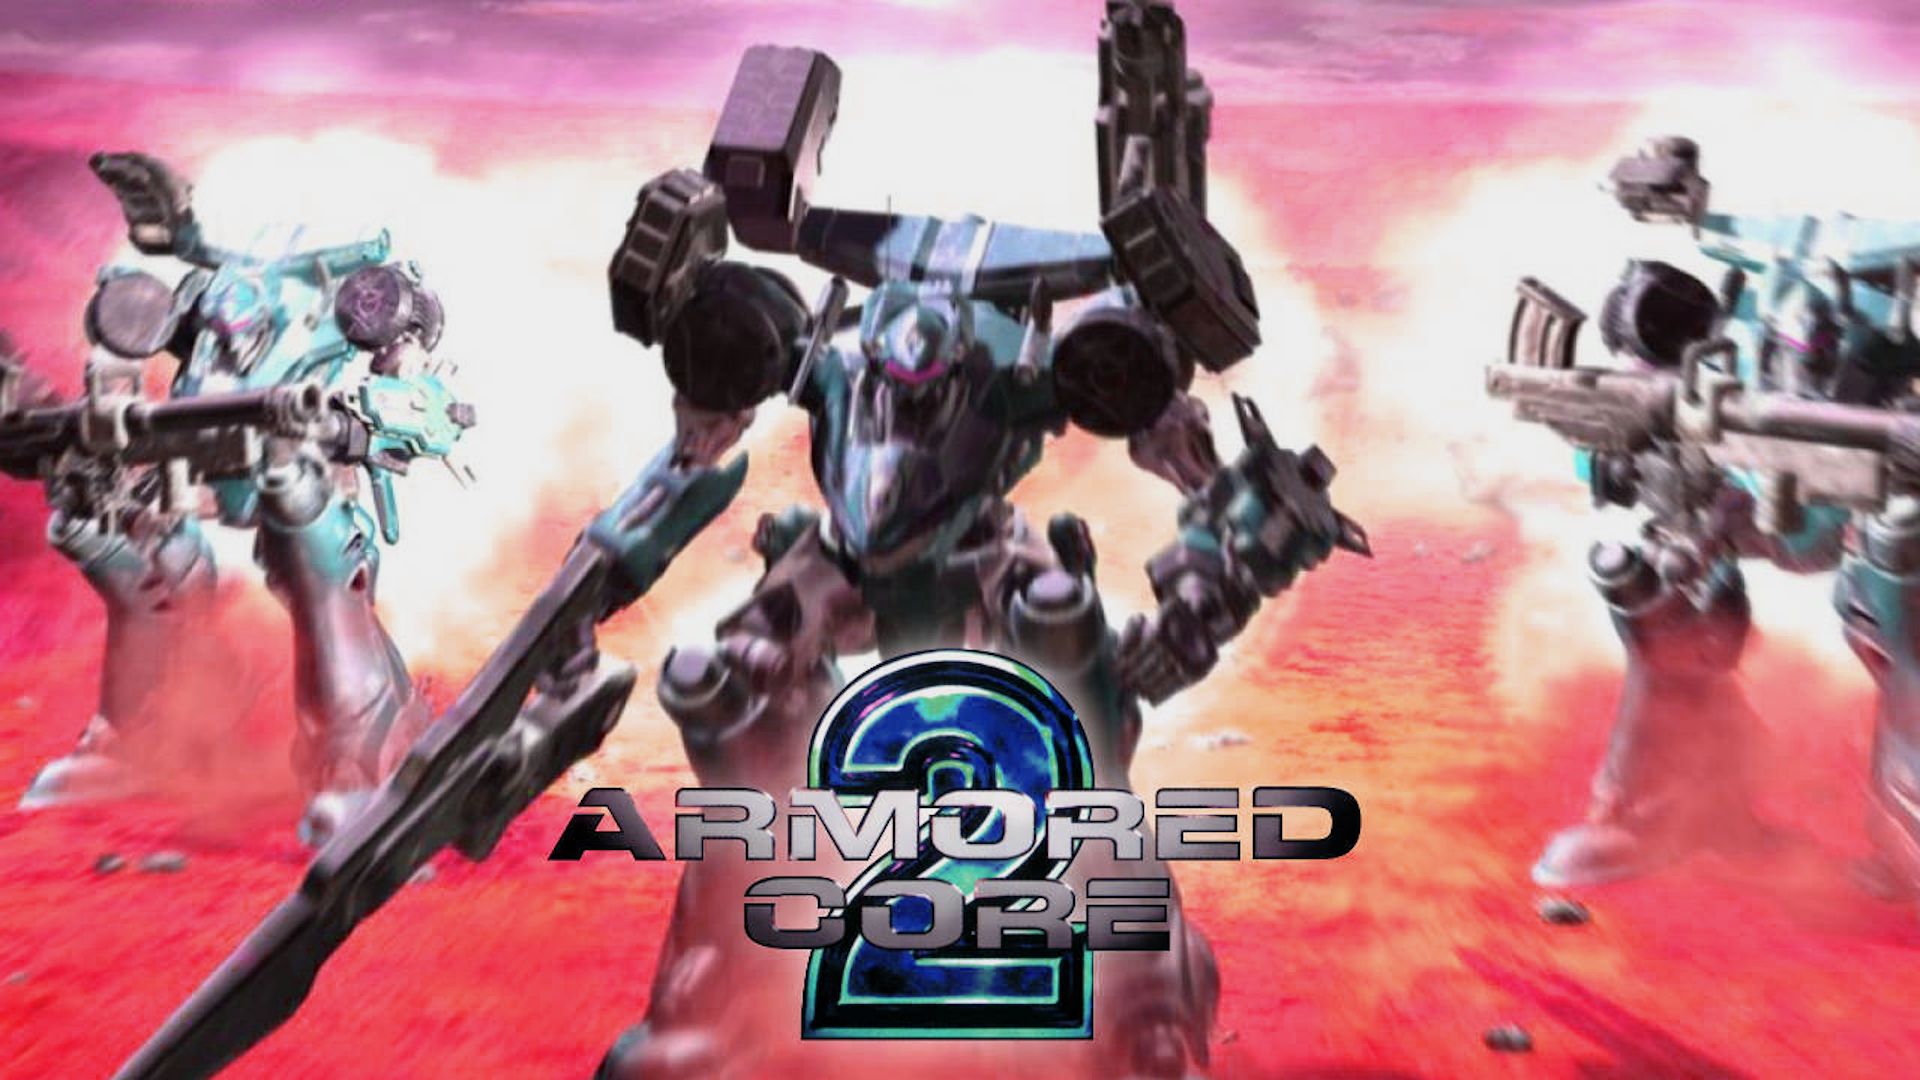 The Armored Core 2 logo has three large mechs behind it moving towards the screen while traveling on the red surface of Mars.